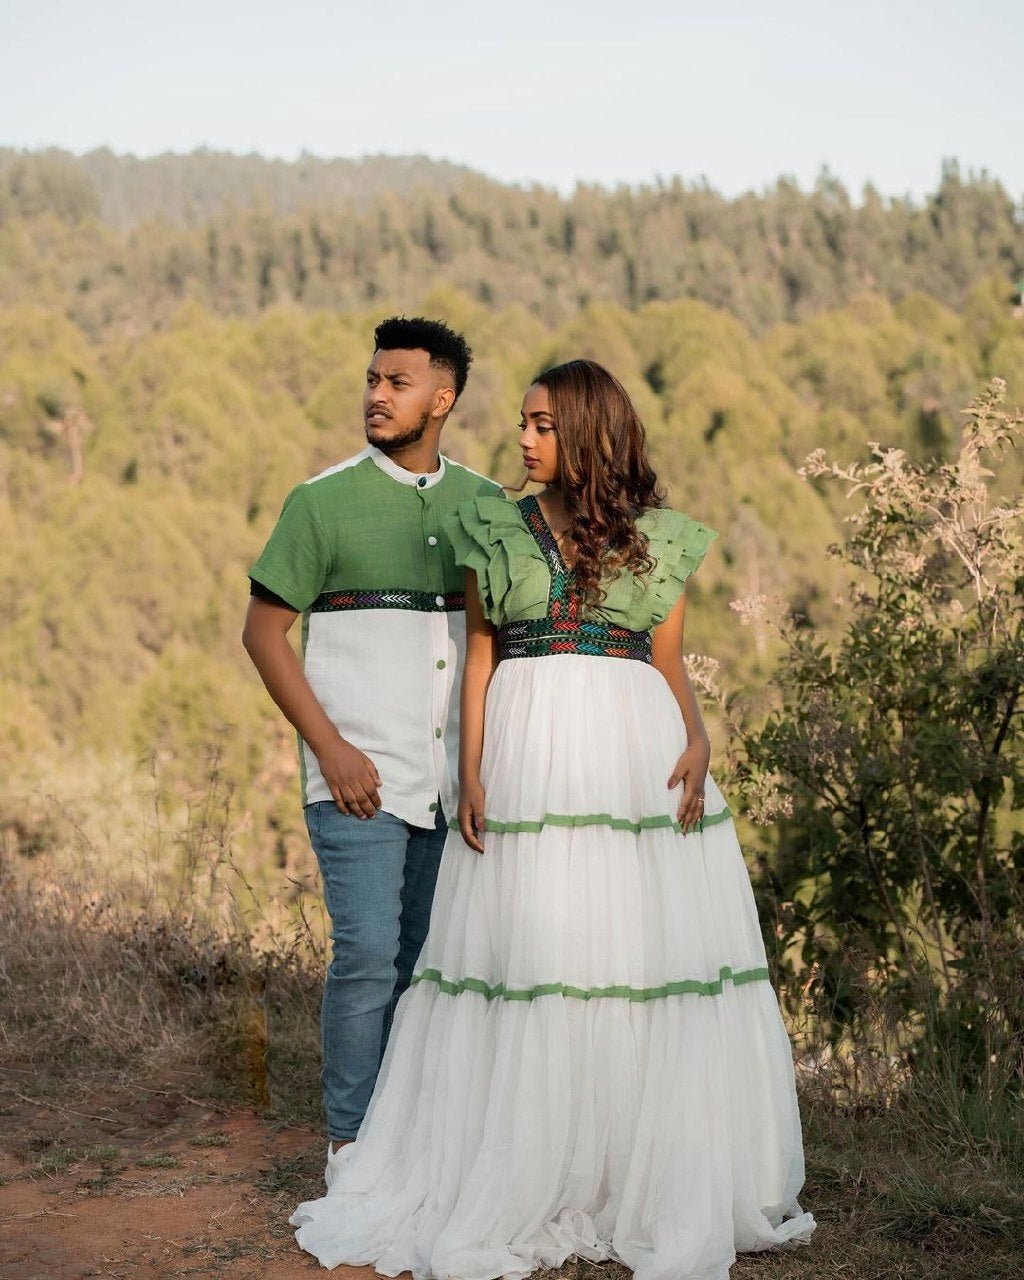 Ethiopian Elegance: Green Design in Habesha Couples Outfit